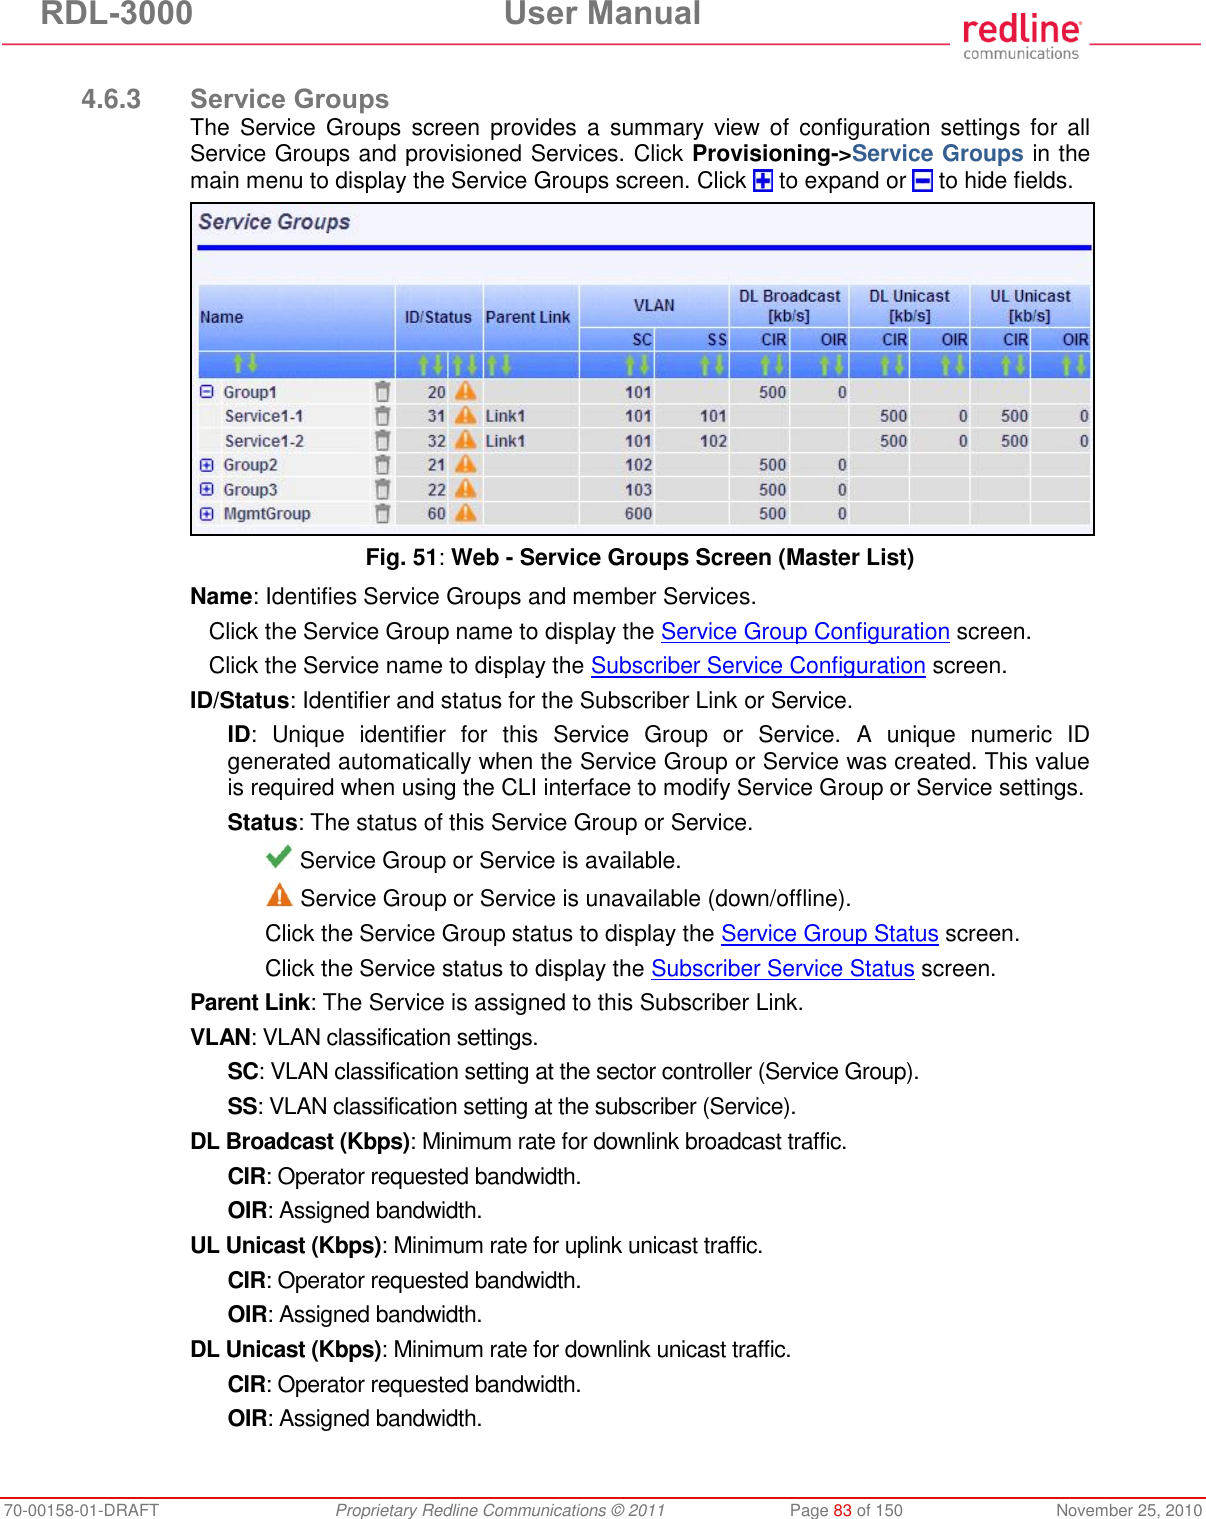 RDL-3000  User Manual 70-00158-01-DRAFT  Proprietary Redline Communications © 2011  Page 83 of 150  November 25, 2010  4.6.3 Service Groups The  Service  Groups  screen  provides  a  summary view  of  configuration  settings  for  all Service Groups and provisioned Services. Click Provisioning-&gt;Service Groups in the main menu to display the Service Groups screen. Click   to expand or   to hide fields.  Fig. 51: Web - Service Groups Screen (Master List) Name: Identifies Service Groups and member Services. Click the Service Group name to display the Service Group Configuration screen. Click the Service name to display the Subscriber Service Configuration screen. ID/Status: Identifier and status for the Subscriber Link or Service. ID:  Unique  identifier  for  this  Service  Group  or  Service.  A  unique  numeric  ID generated automatically when the Service Group or Service was created. This value is required when using the CLI interface to modify Service Group or Service settings. Status: The status of this Service Group or Service.  Service Group or Service is available.  Service Group or Service is unavailable (down/offline). Click the Service Group status to display the Service Group Status screen. Click the Service status to display the Subscriber Service Status screen. Parent Link: The Service is assigned to this Subscriber Link. VLAN: VLAN classification settings. SC: VLAN classification setting at the sector controller (Service Group). SS: VLAN classification setting at the subscriber (Service). DL Broadcast (Kbps): Minimum rate for downlink broadcast traffic.  CIR: Operator requested bandwidth. OIR: Assigned bandwidth. UL Unicast (Kbps): Minimum rate for uplink unicast traffic. CIR: Operator requested bandwidth. OIR: Assigned bandwidth. DL Unicast (Kbps): Minimum rate for downlink unicast traffic. CIR: Operator requested bandwidth. OIR: Assigned bandwidth. 